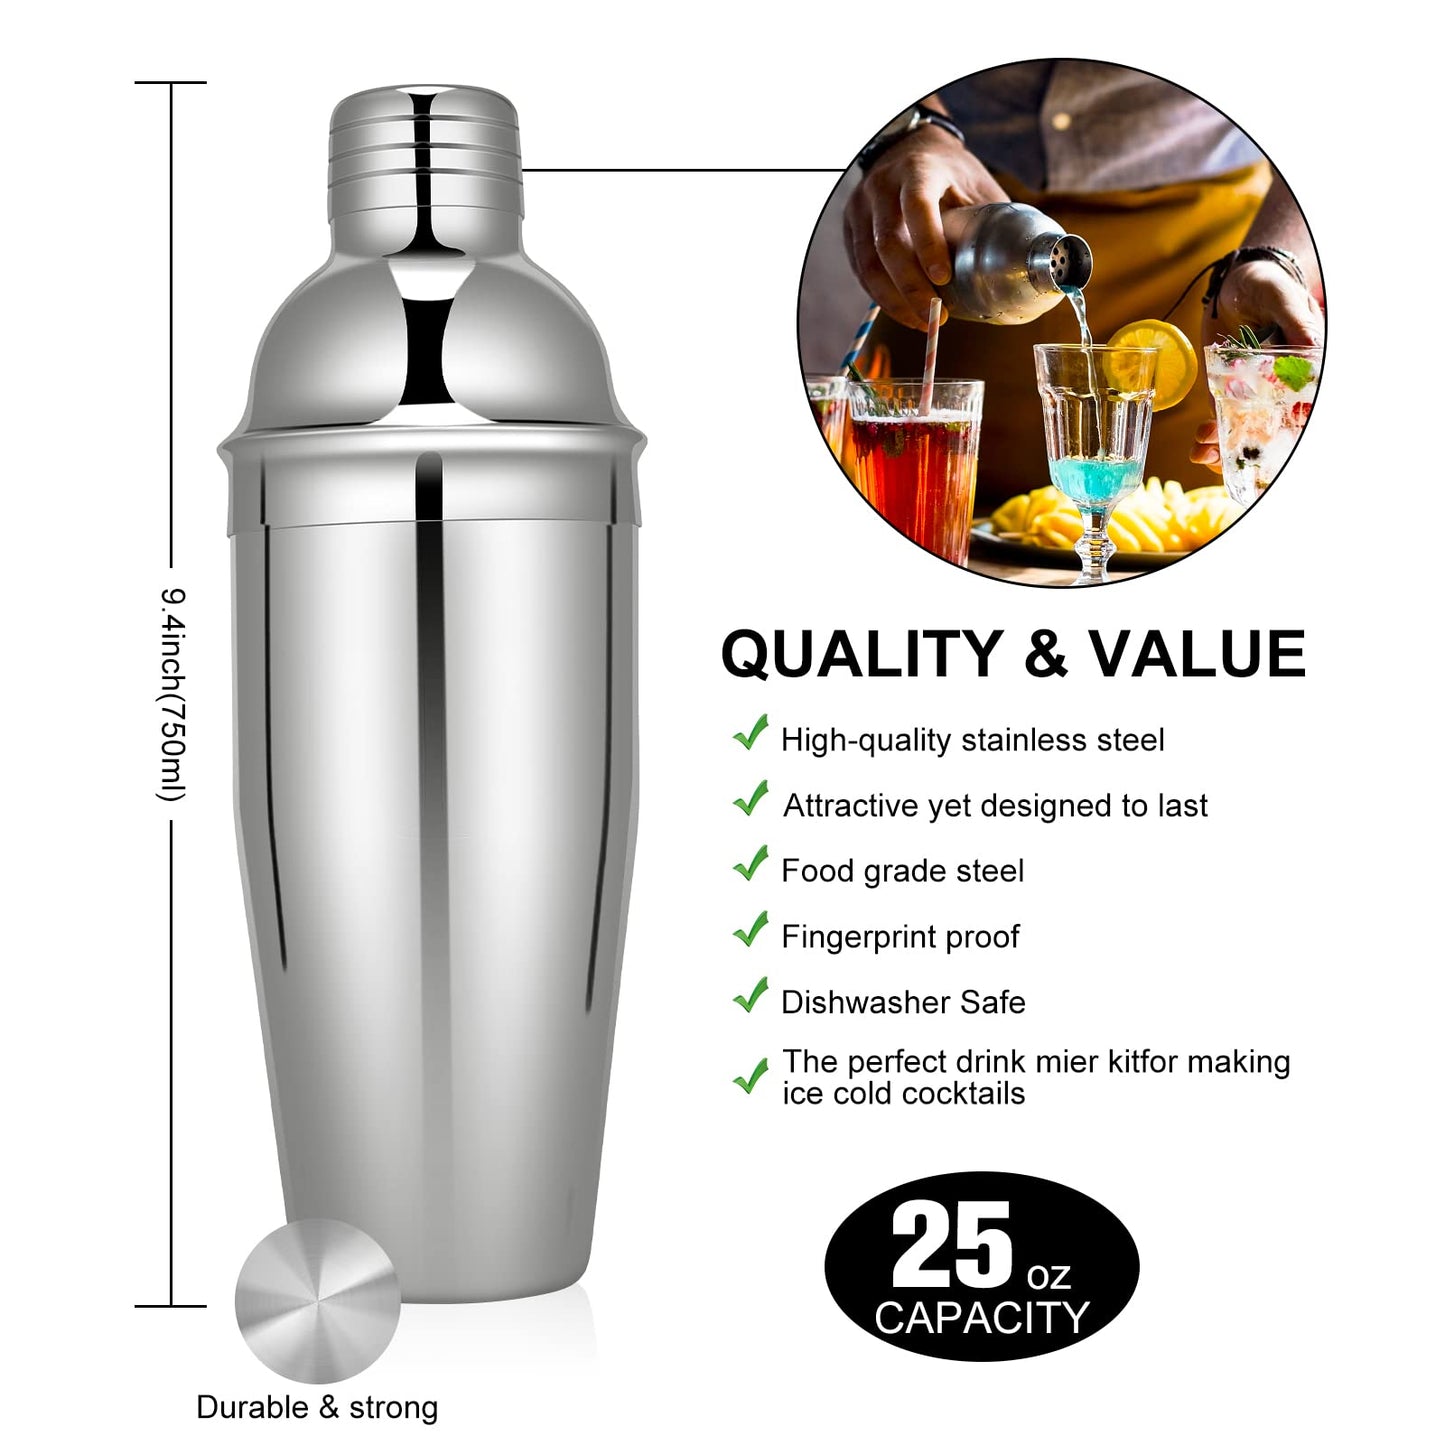 Cocktail Shaker Set, 23-Piece Stainless Steel Bartender Kit with Acrylic Stand & Cocktail Recipes Booklet, Professional Bar Tools for Drink Mixing, Home, Bar, Party (Include 4 Whiskey Stones)